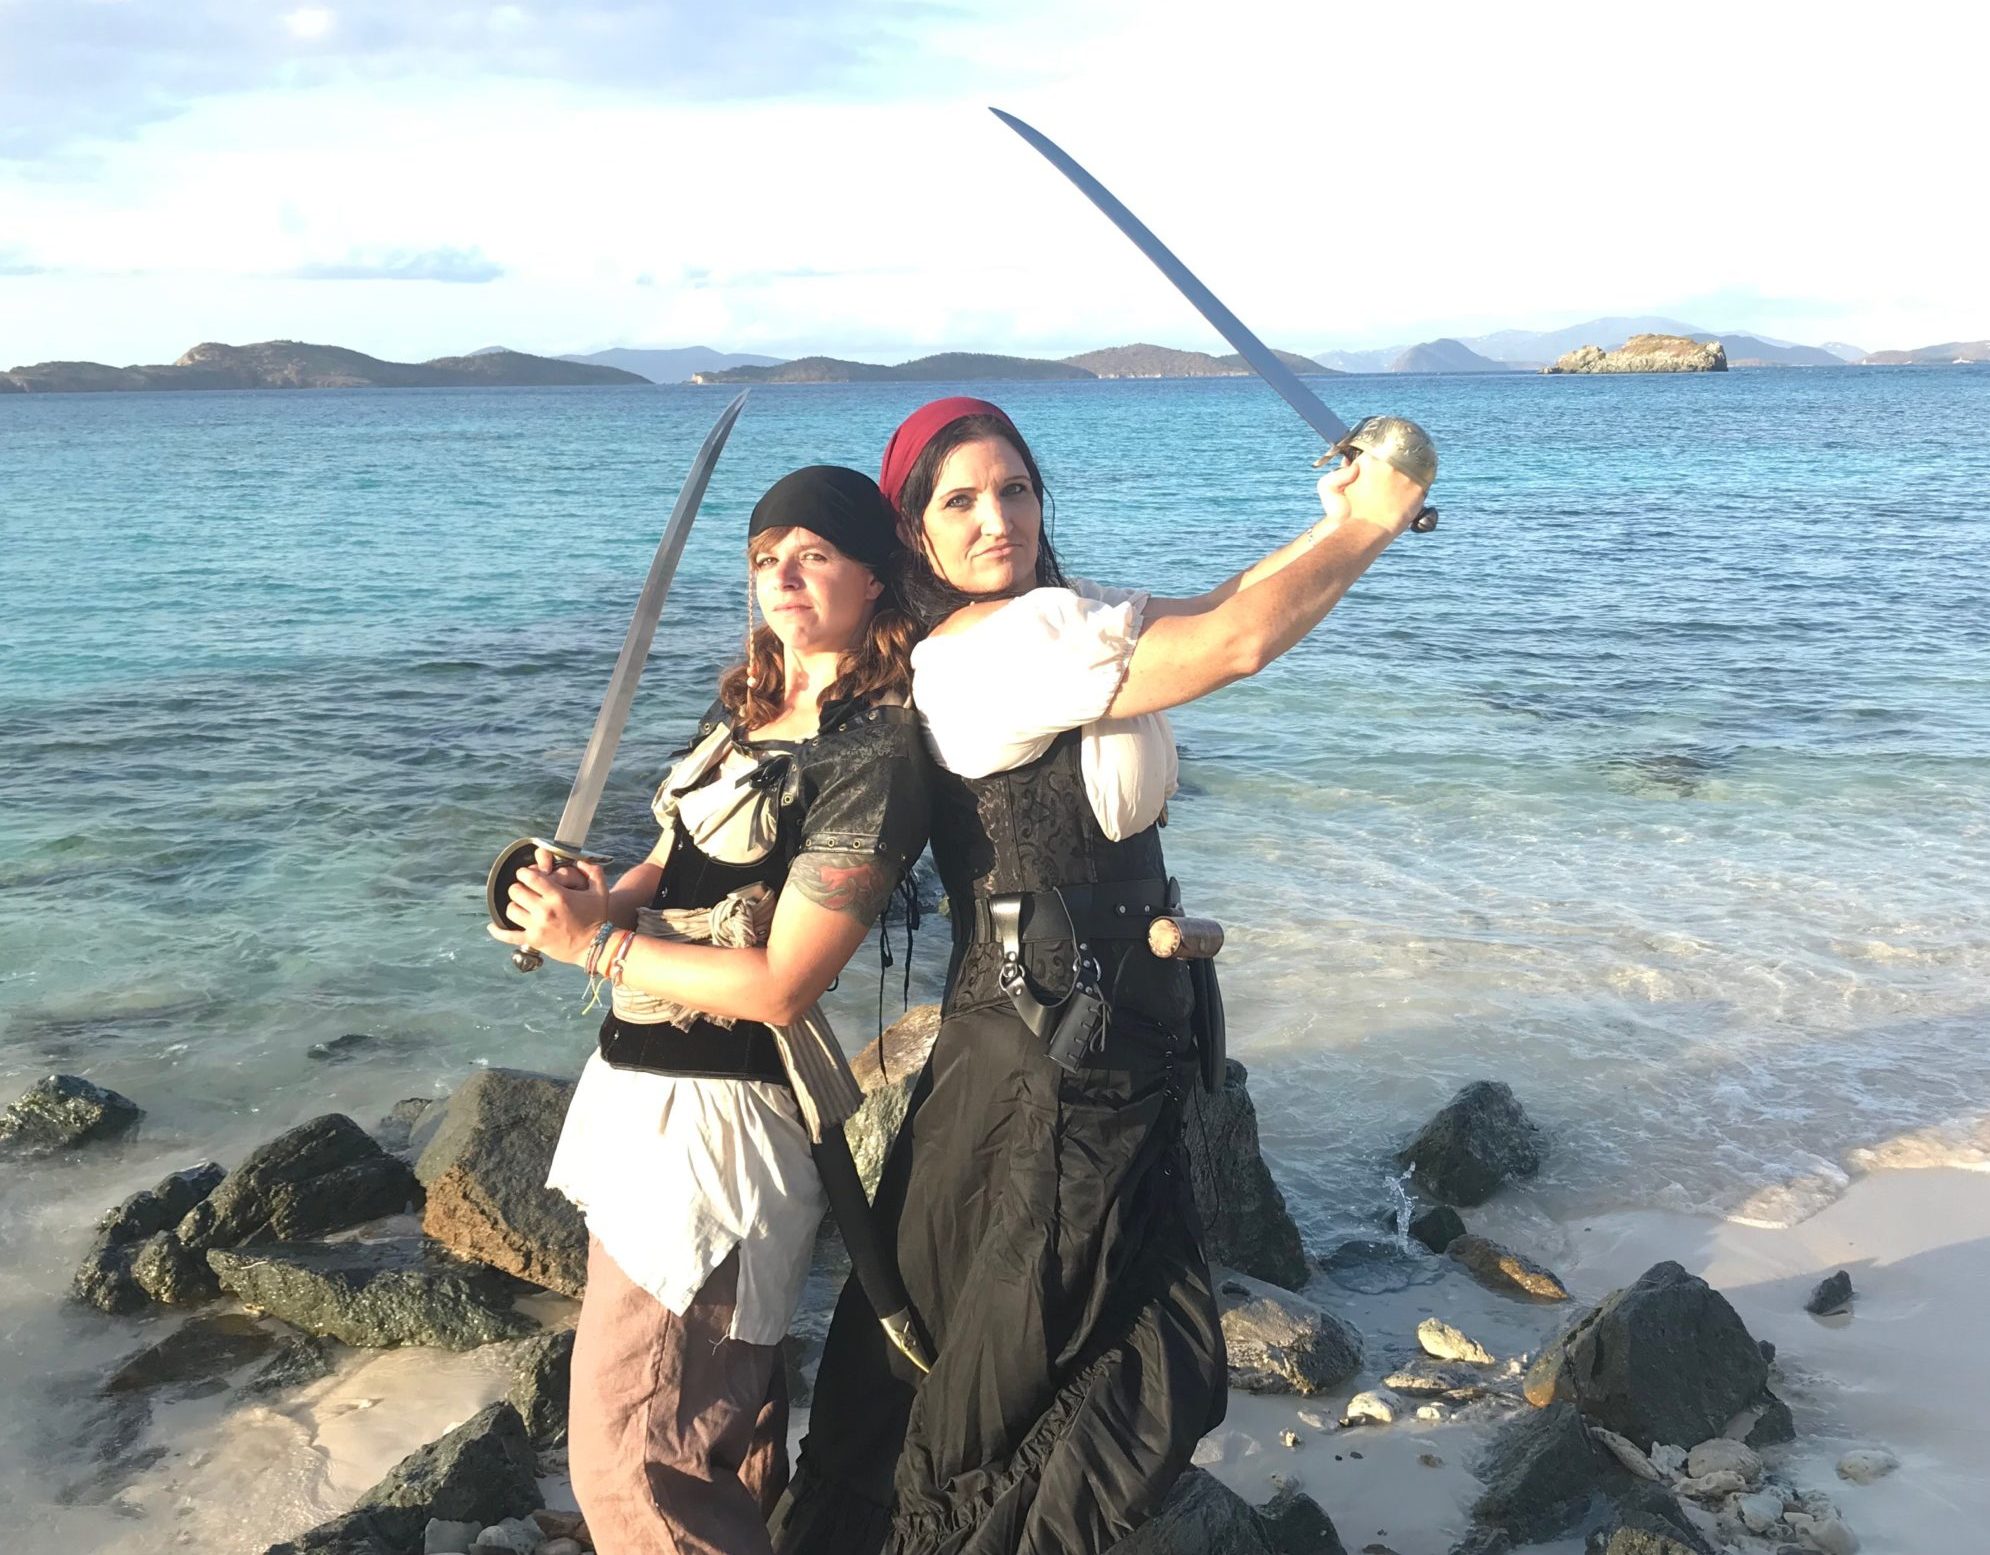 Two pirates pose back to back on a rocky beach, brandishing swords